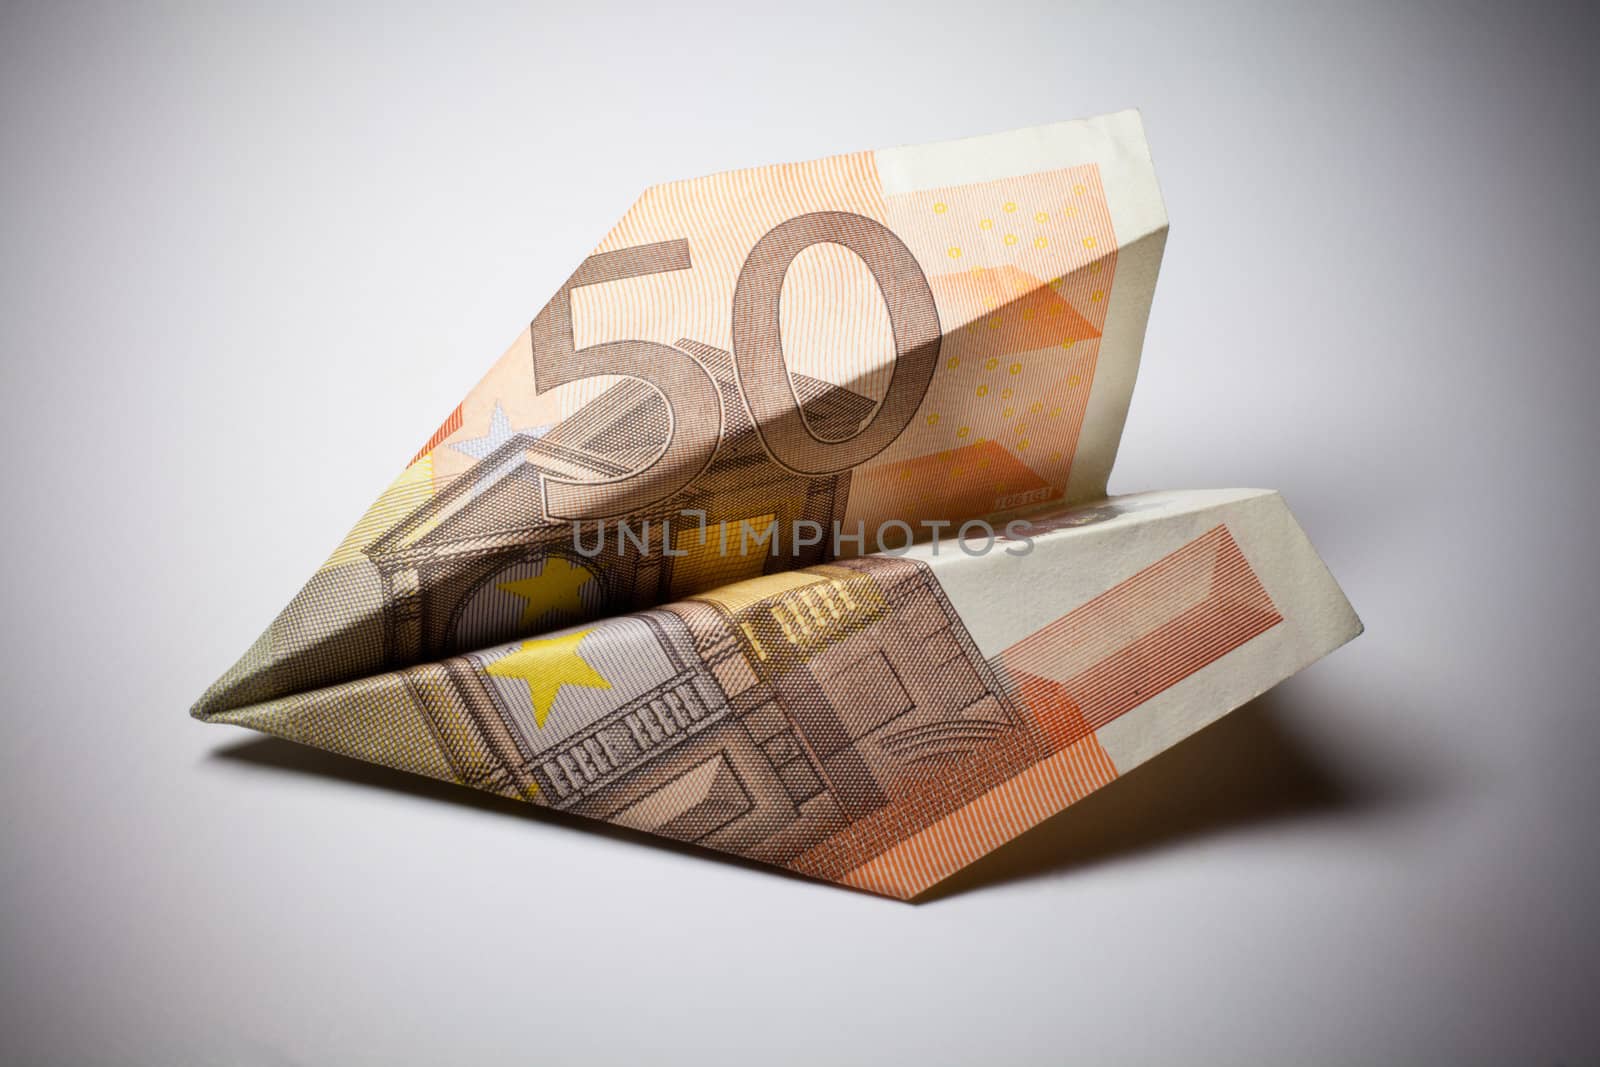 Paper airplane model made of money by Portokalis